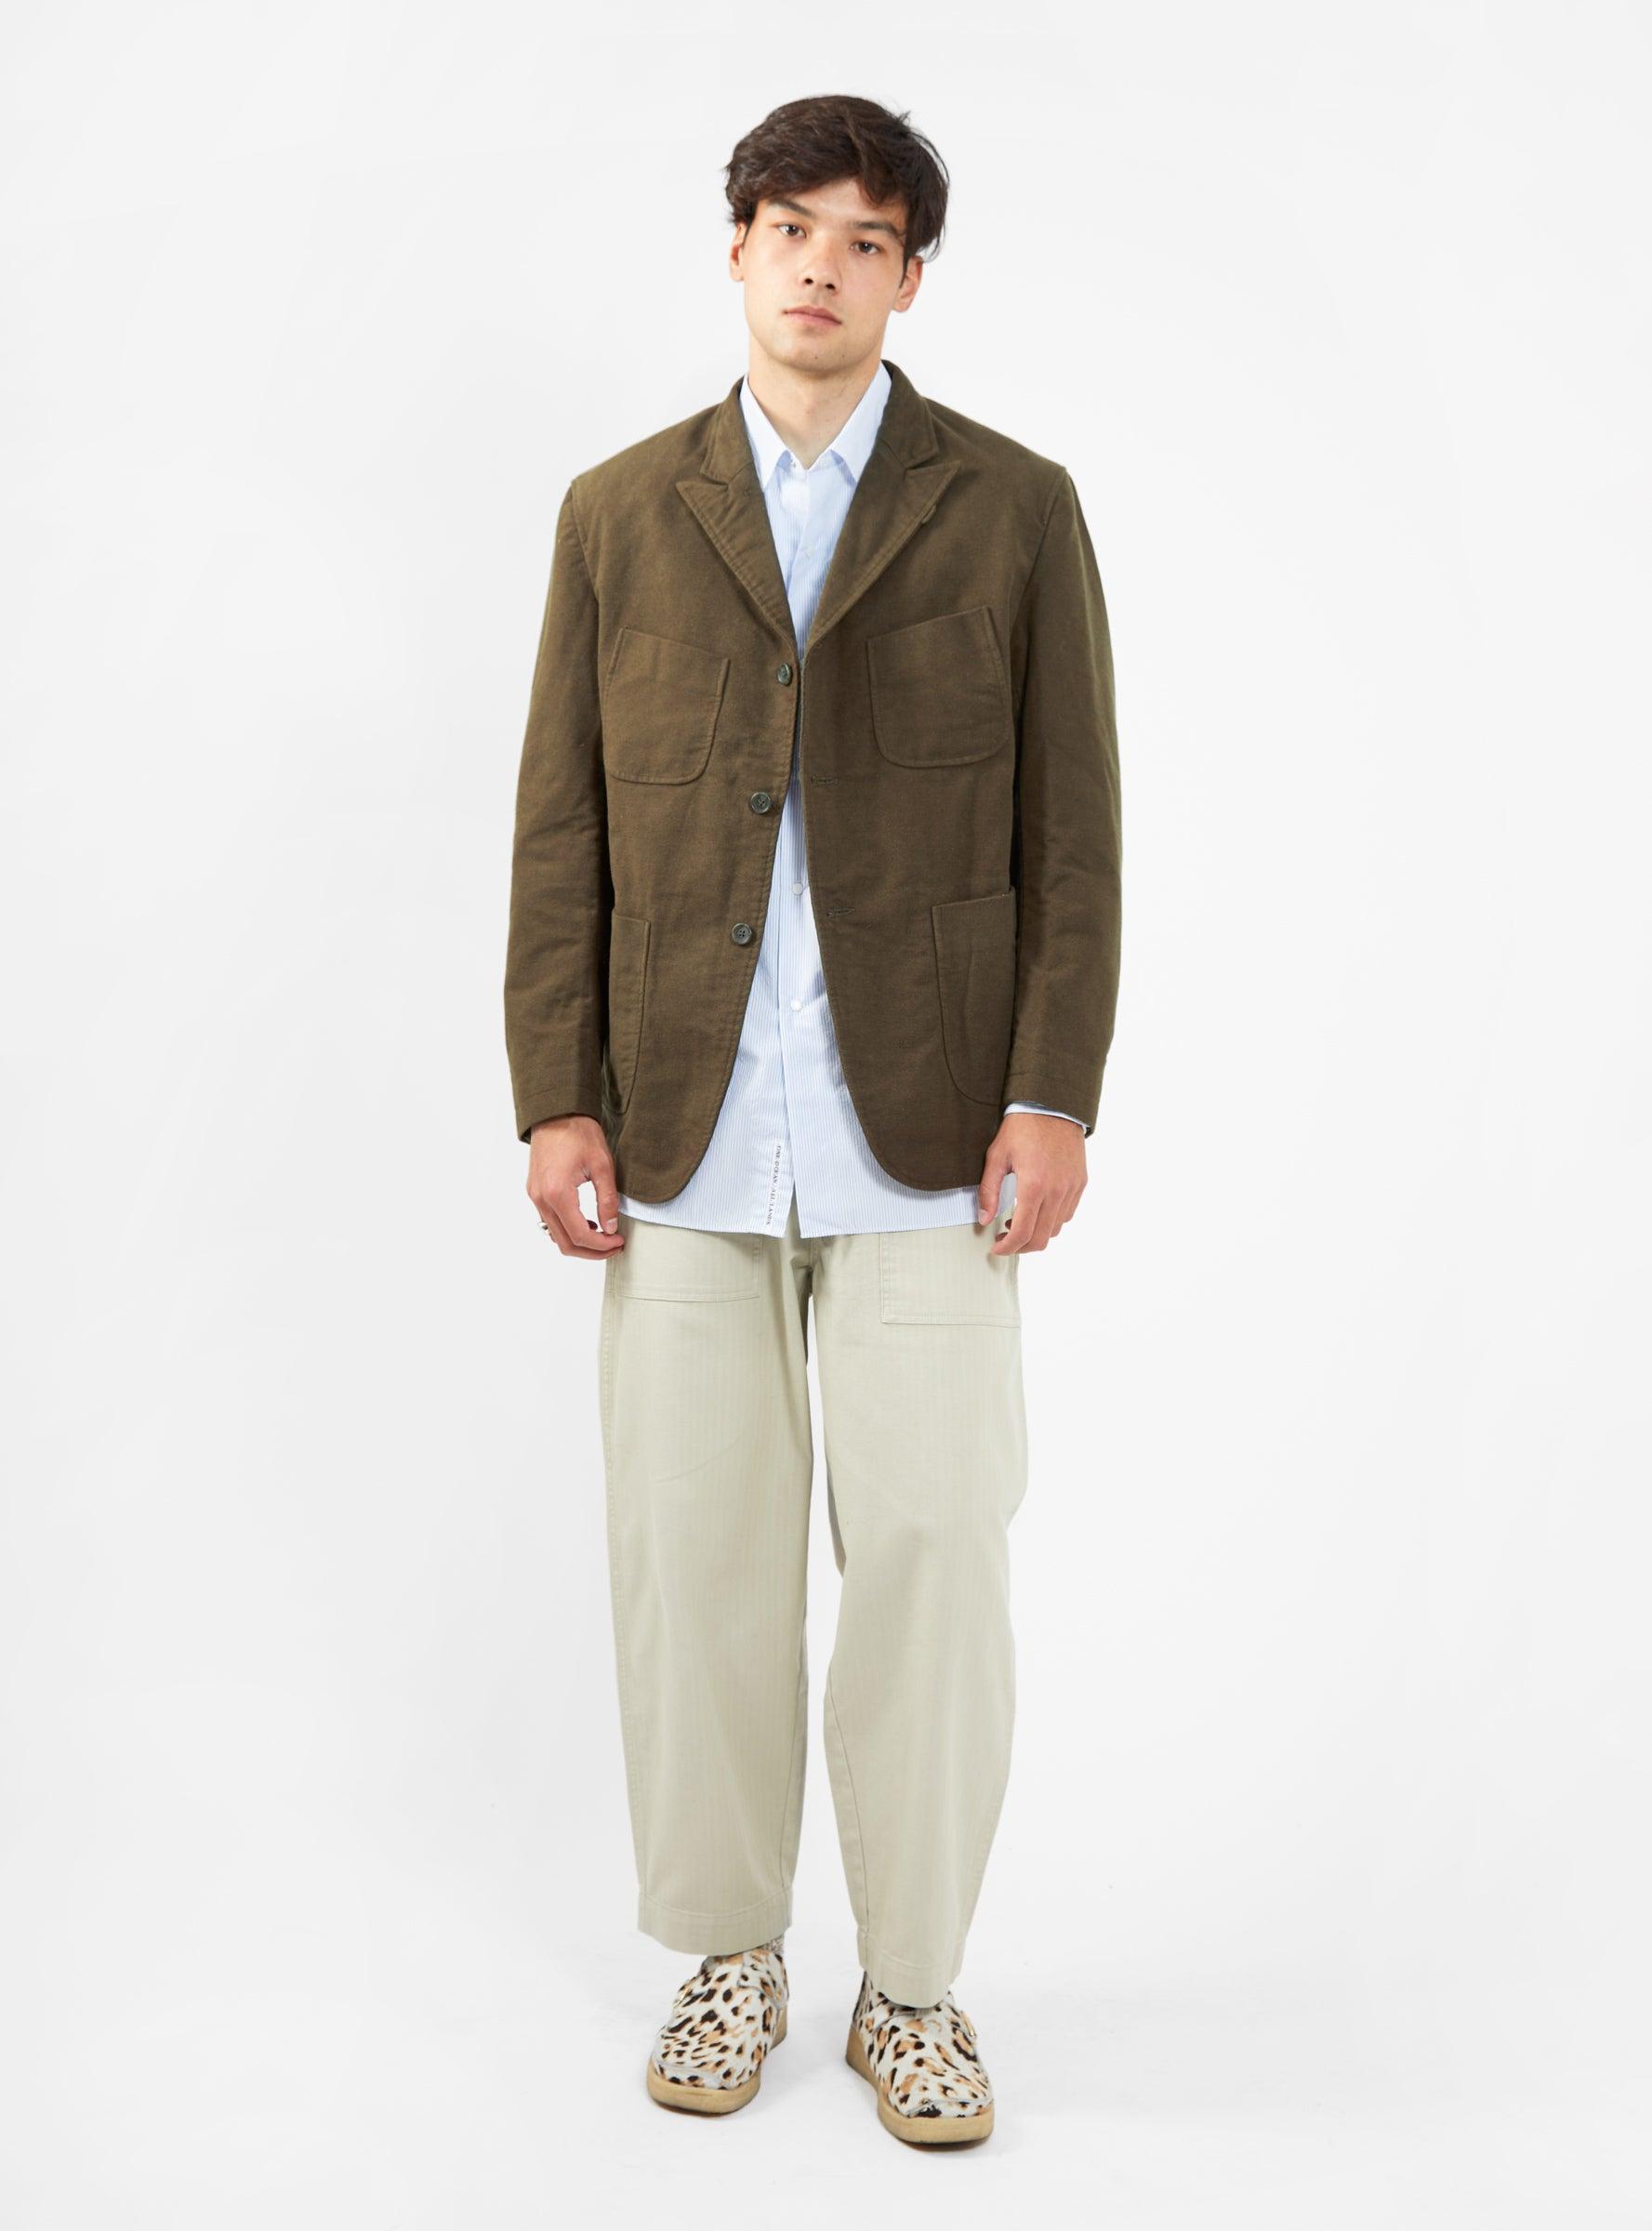 Engineered Garments Nb Cotton Moleskin Jacket Olive in Brown for